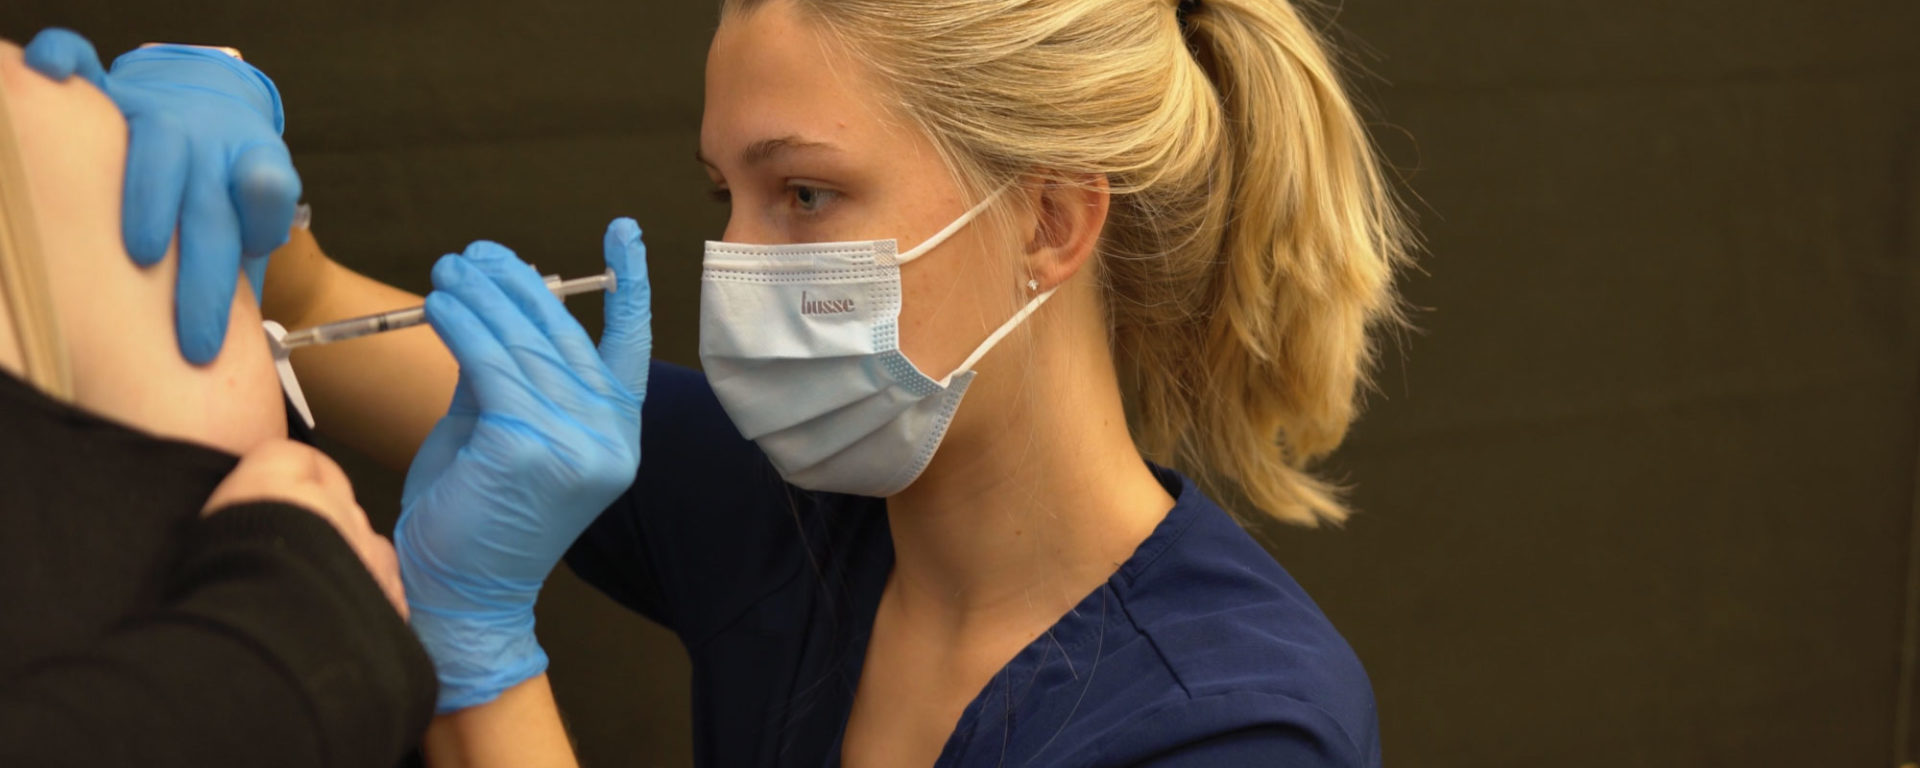 A blonde UTC nursing student gives the Covid vaccine to a patient